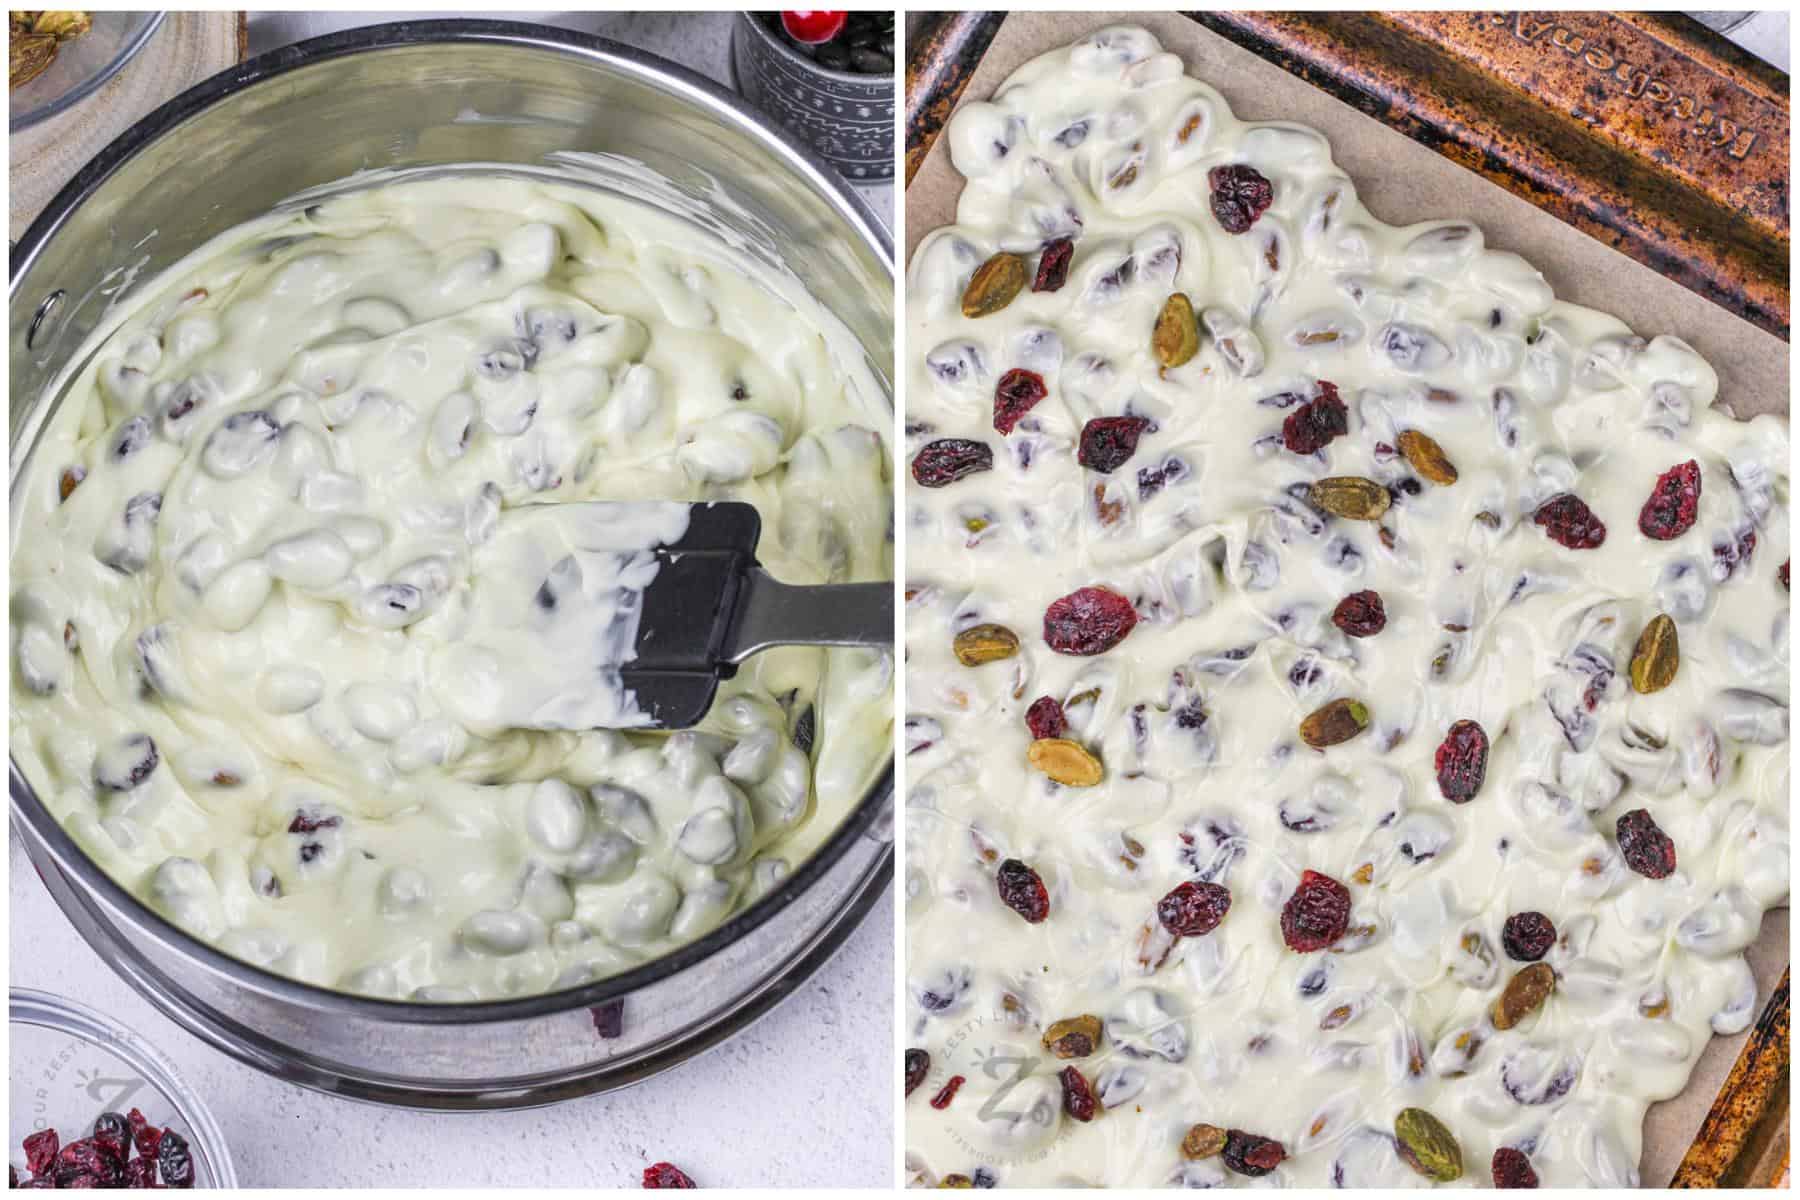 spreading White Chocolate Bark on a sheet pan